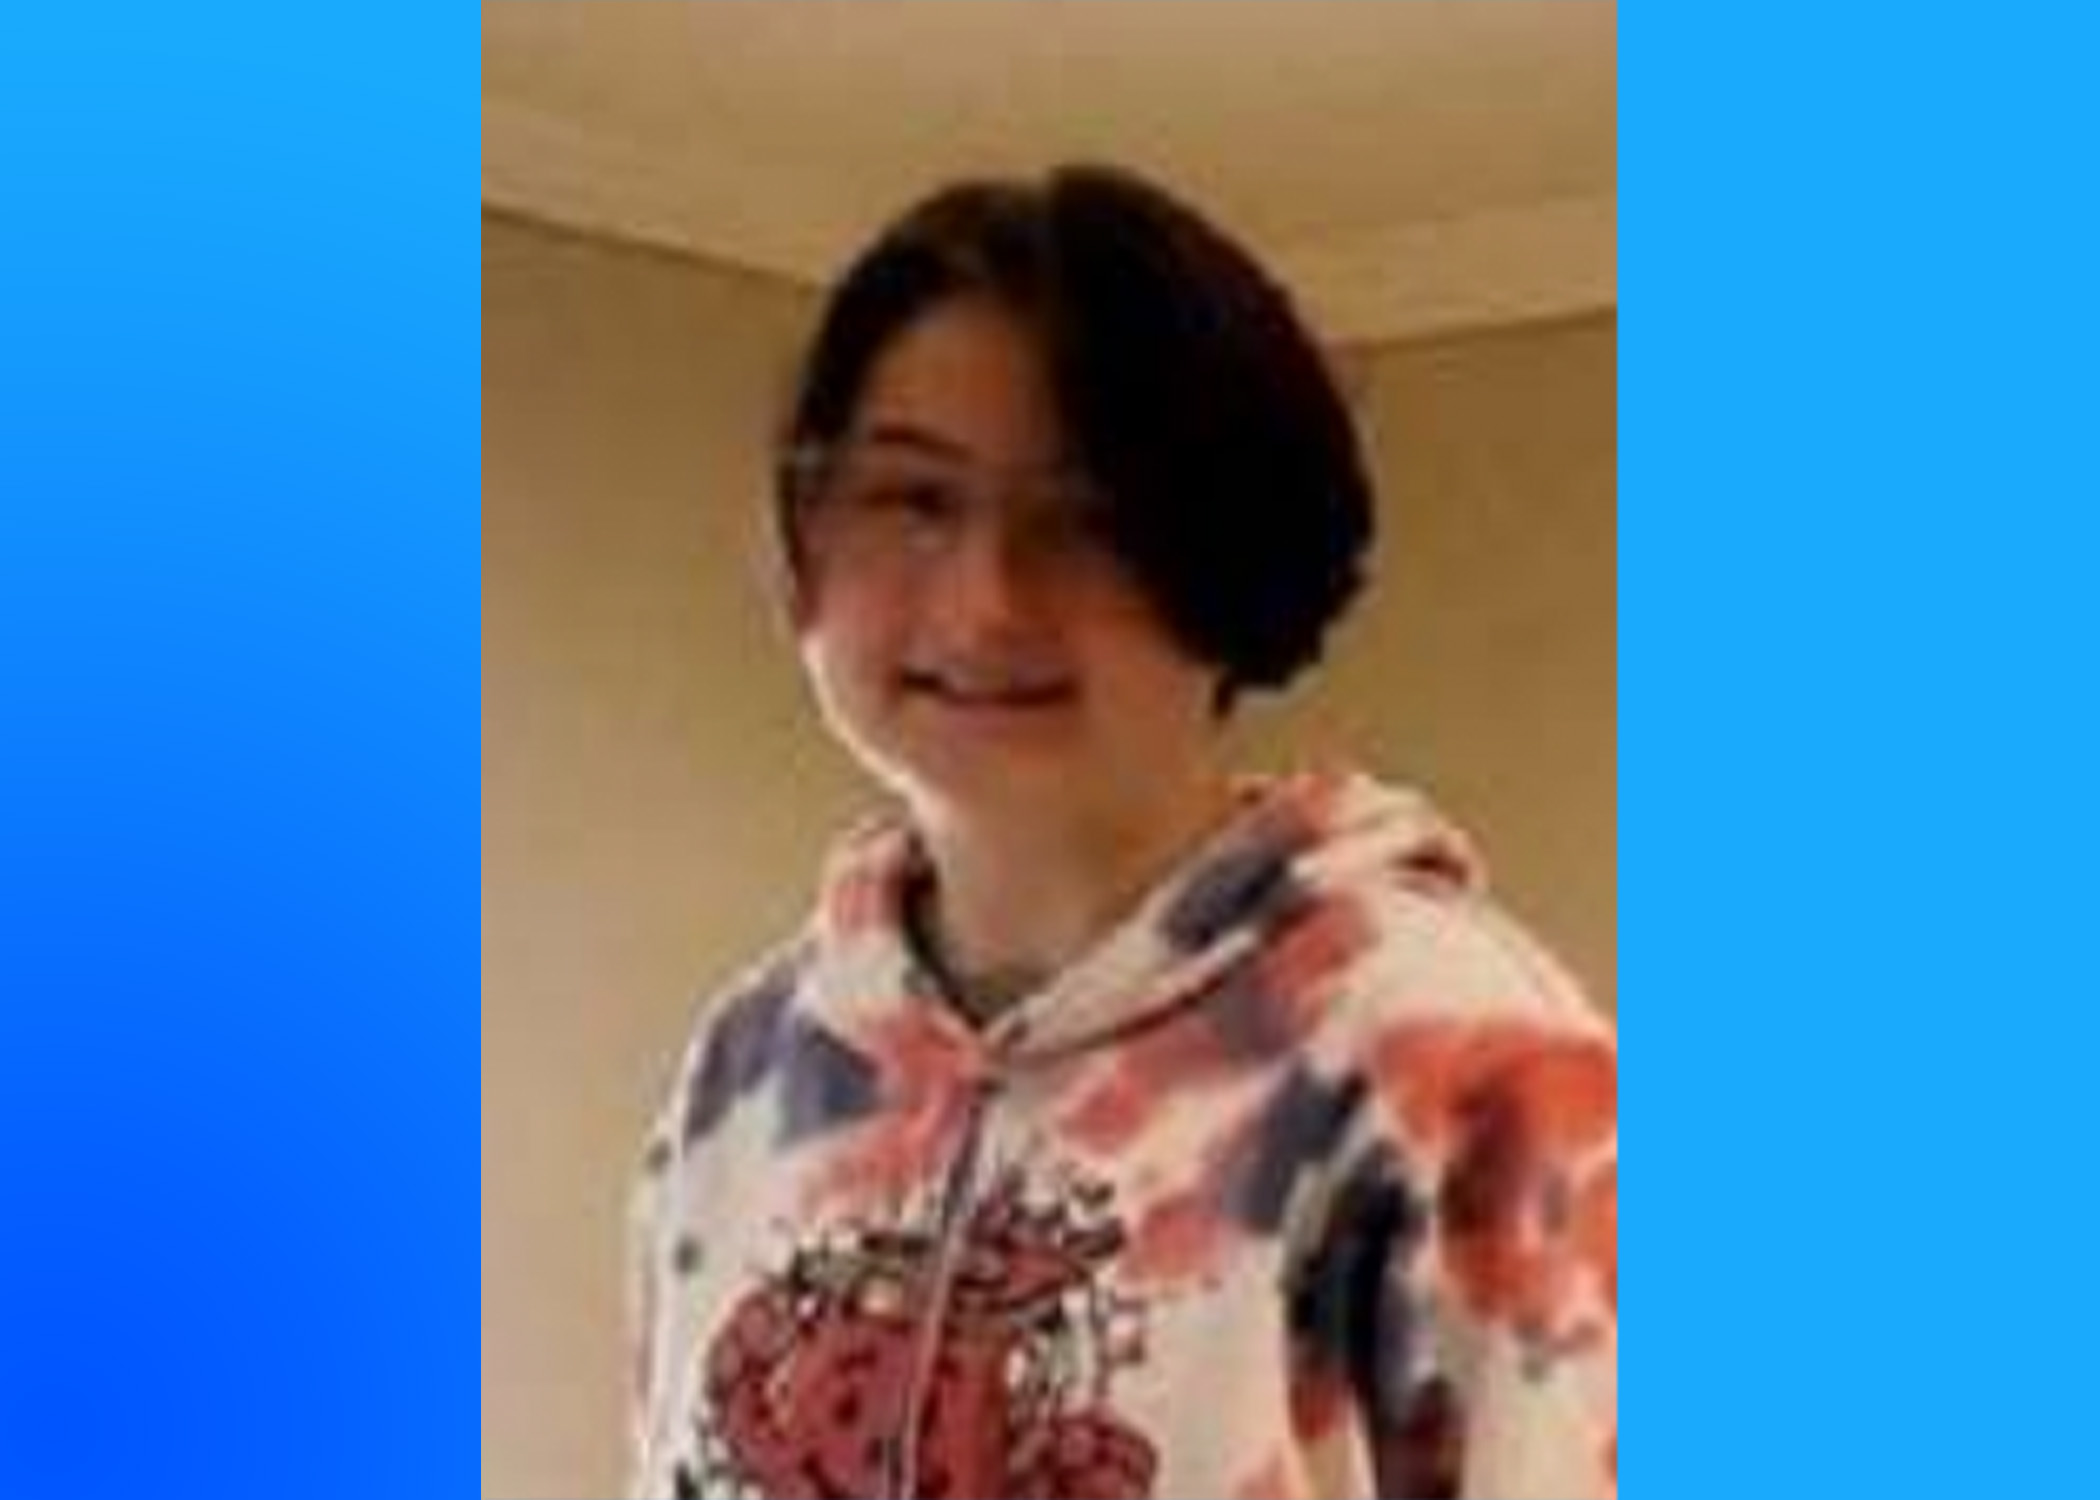 Authorities look for missing 16-year-old last seen 9 days ago